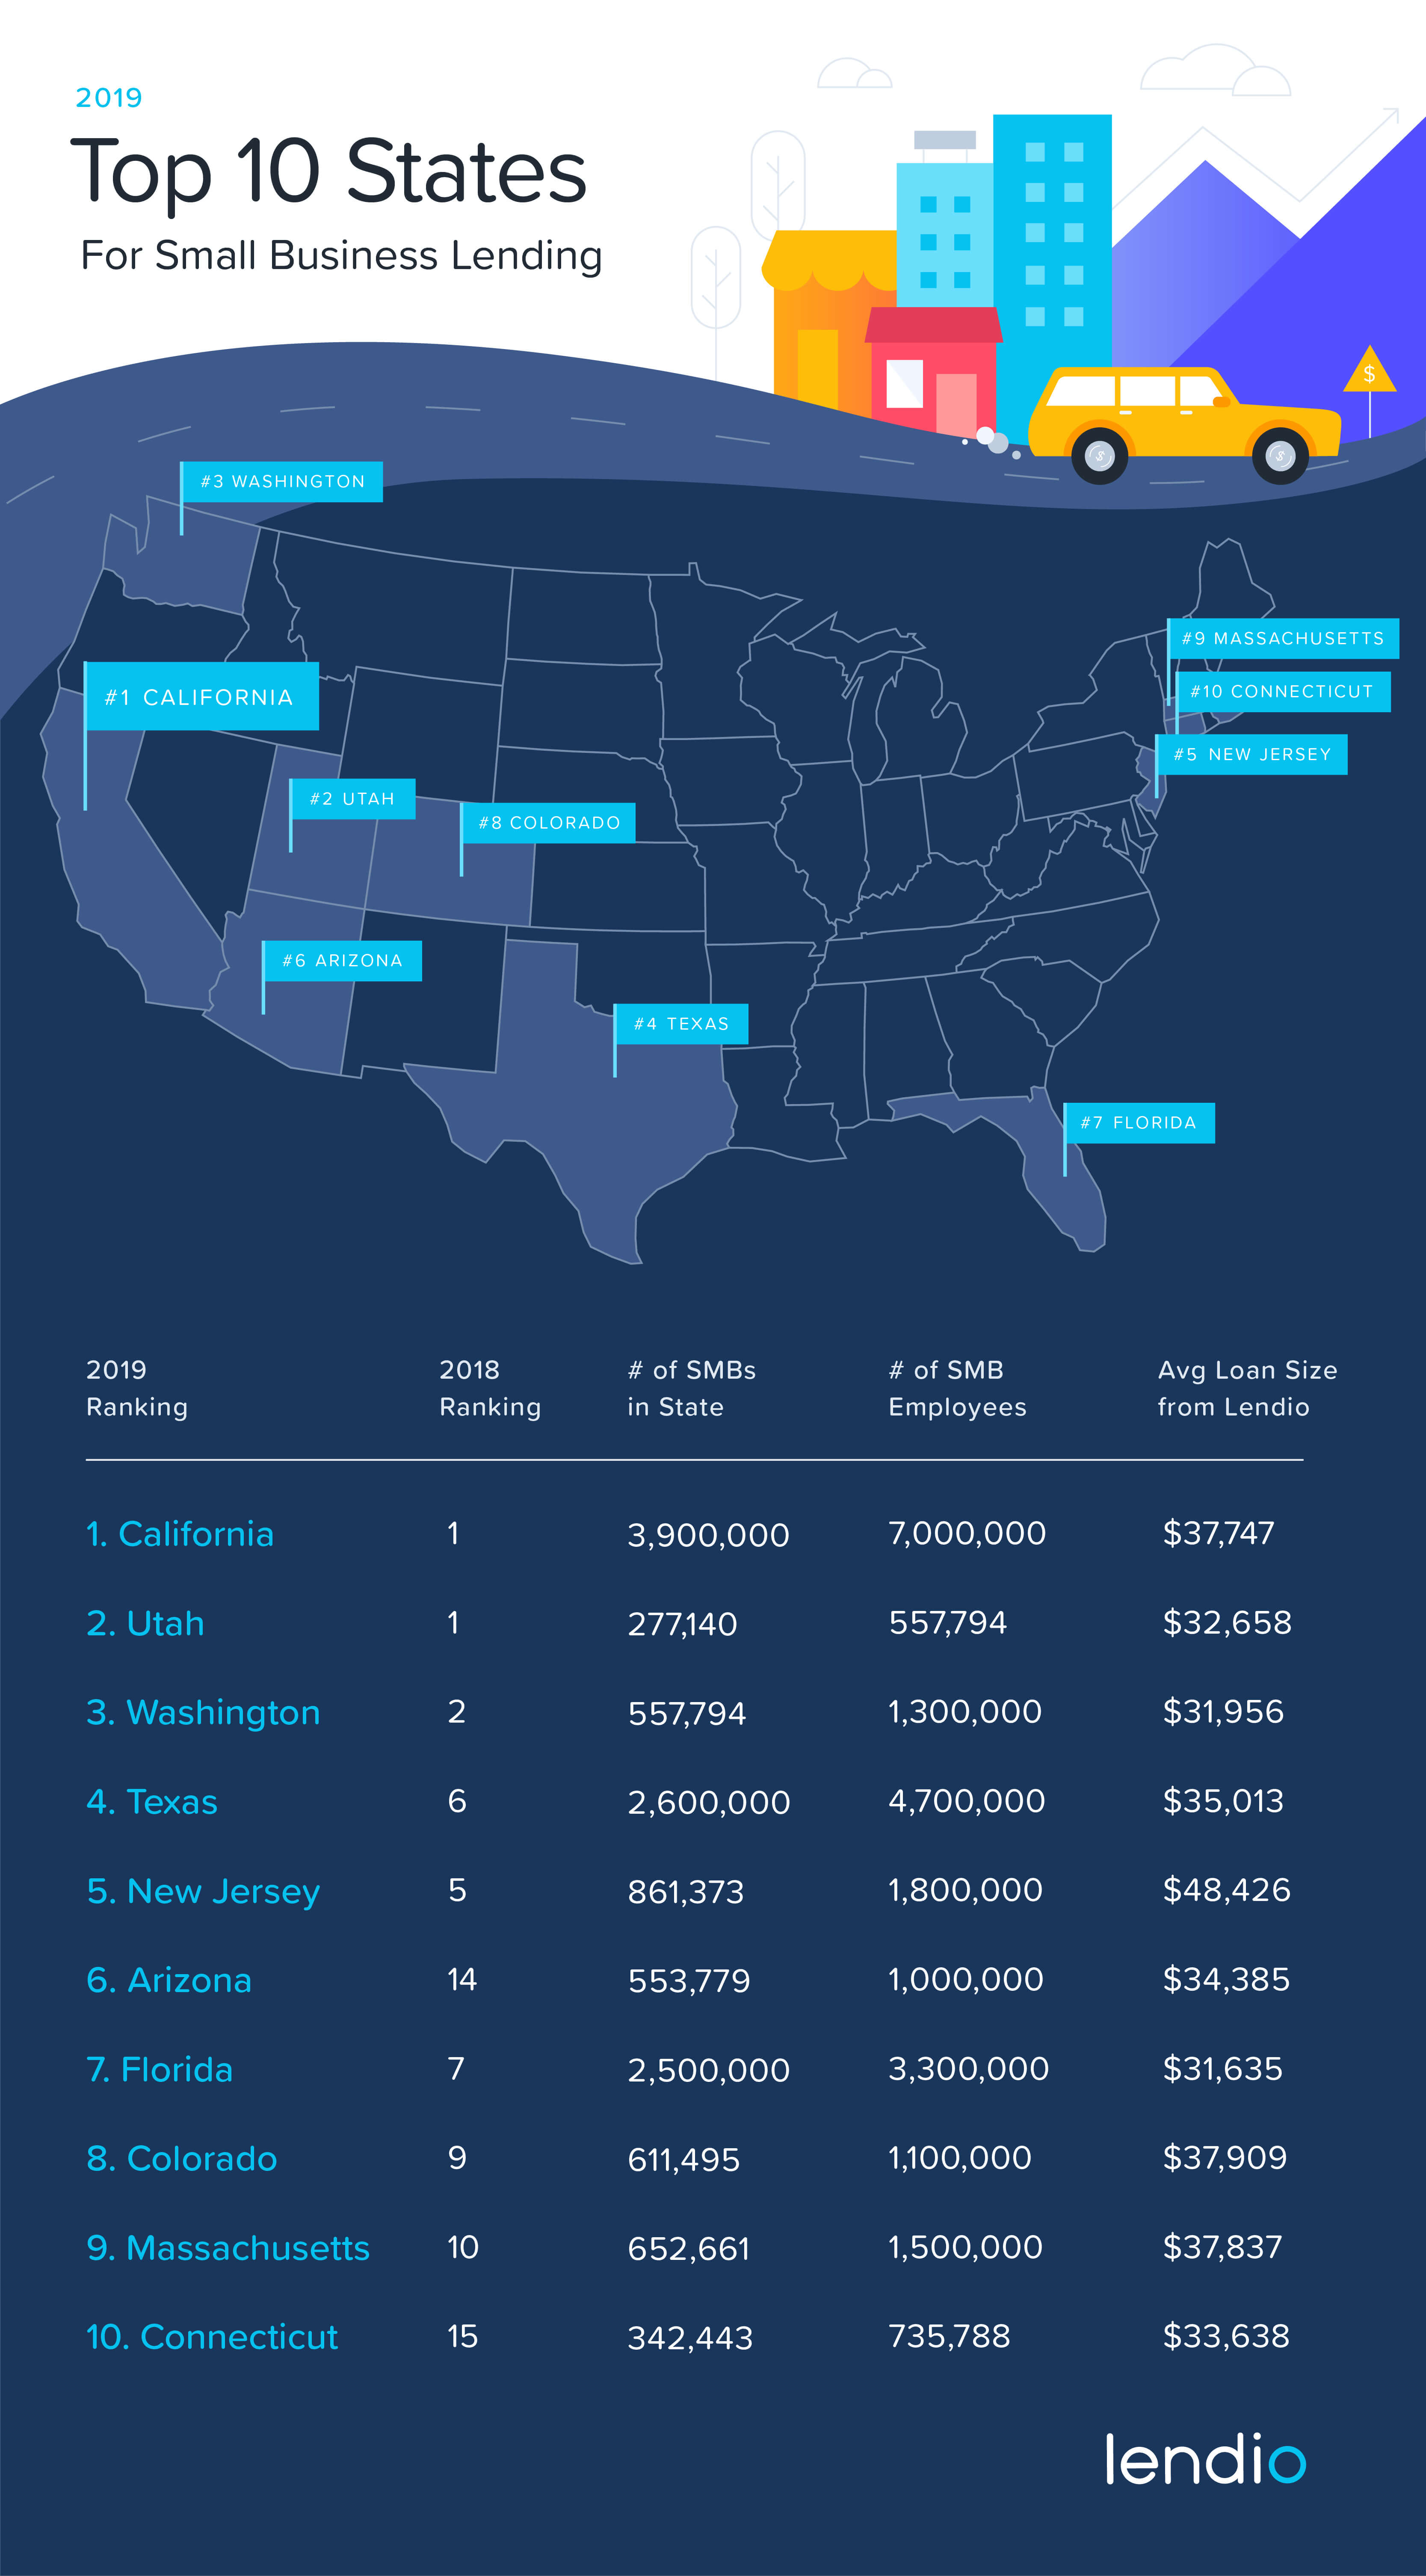 Lendio's list of top 10 states for small business lending